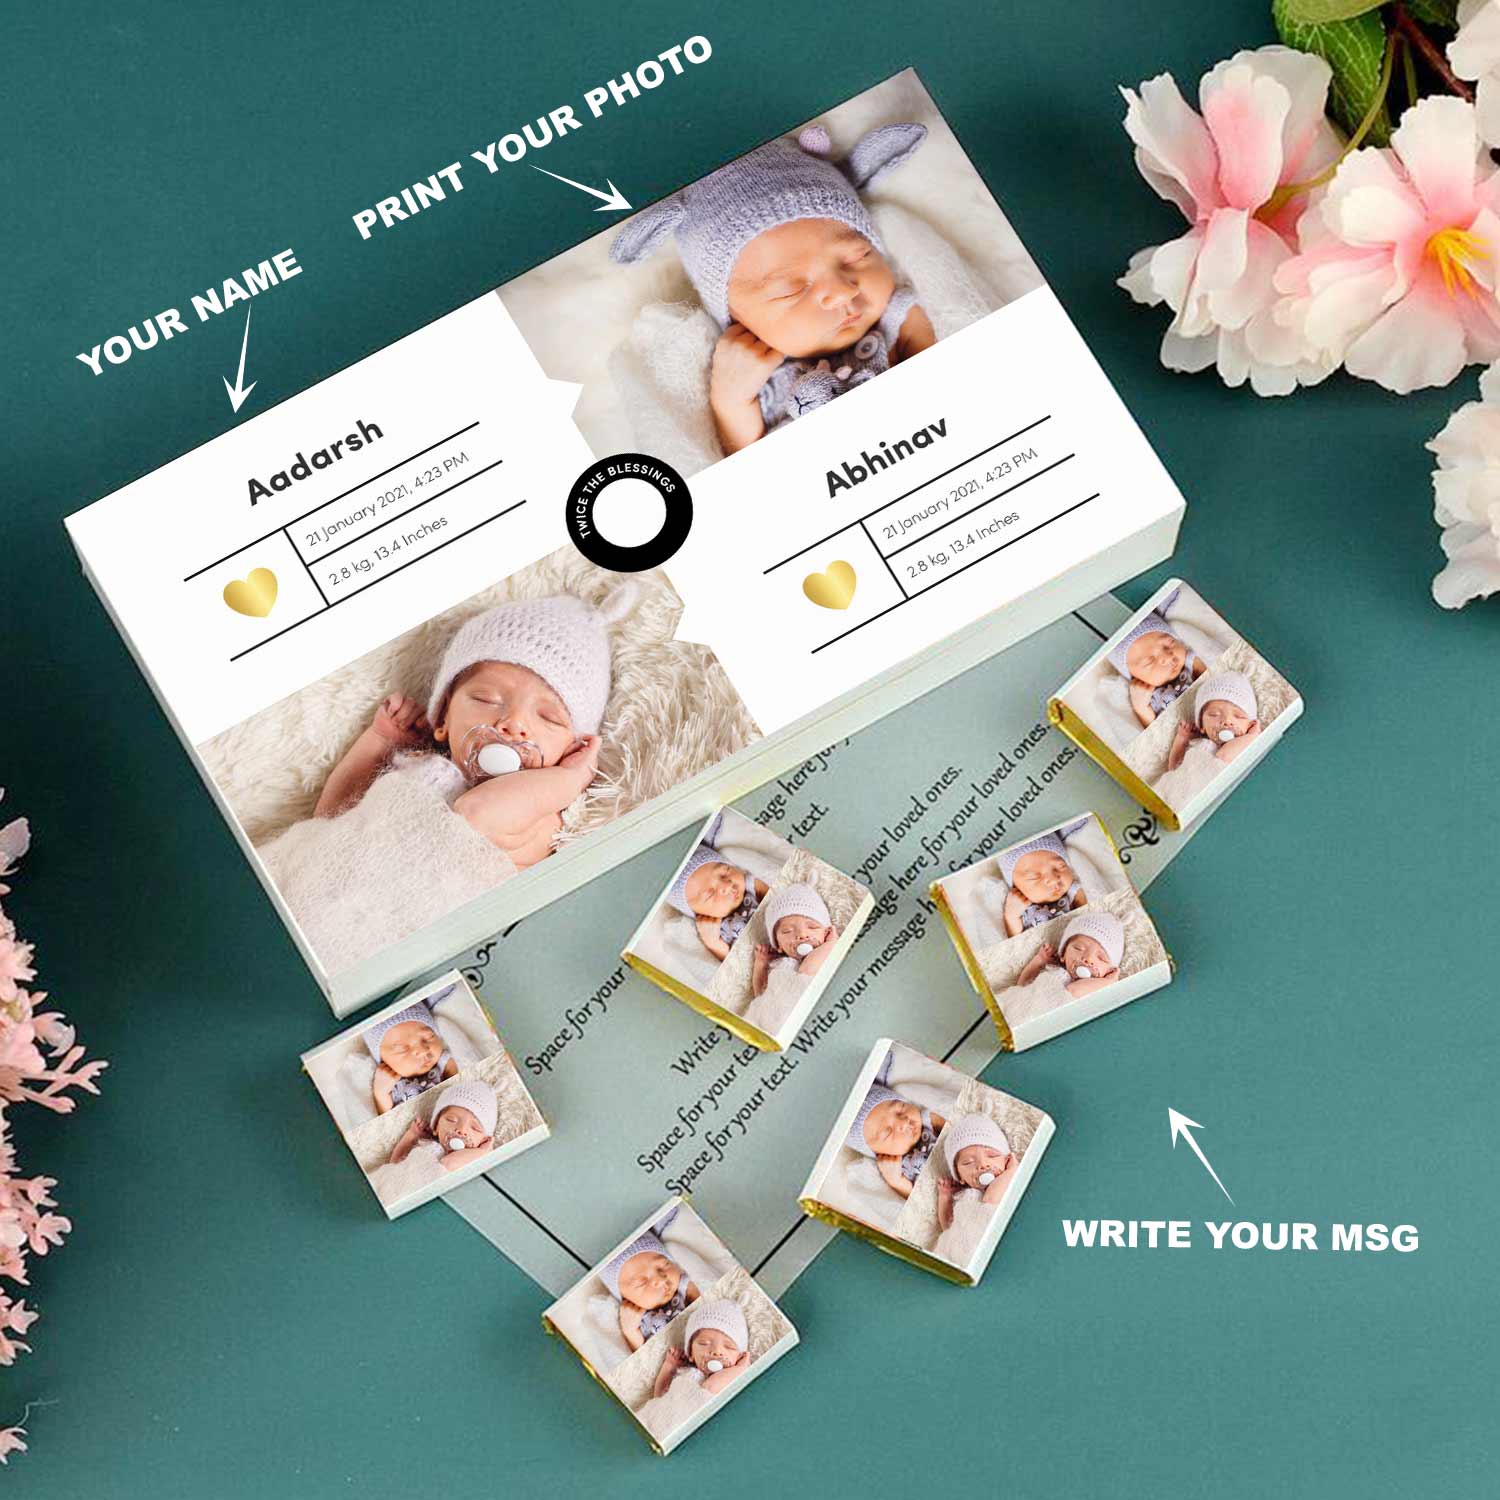 Unique newborn baby gift ideas india  Best gift for newborn baby boy.  Newborn baby gift ideas for parents.  Most useful gifts for newborn baby.